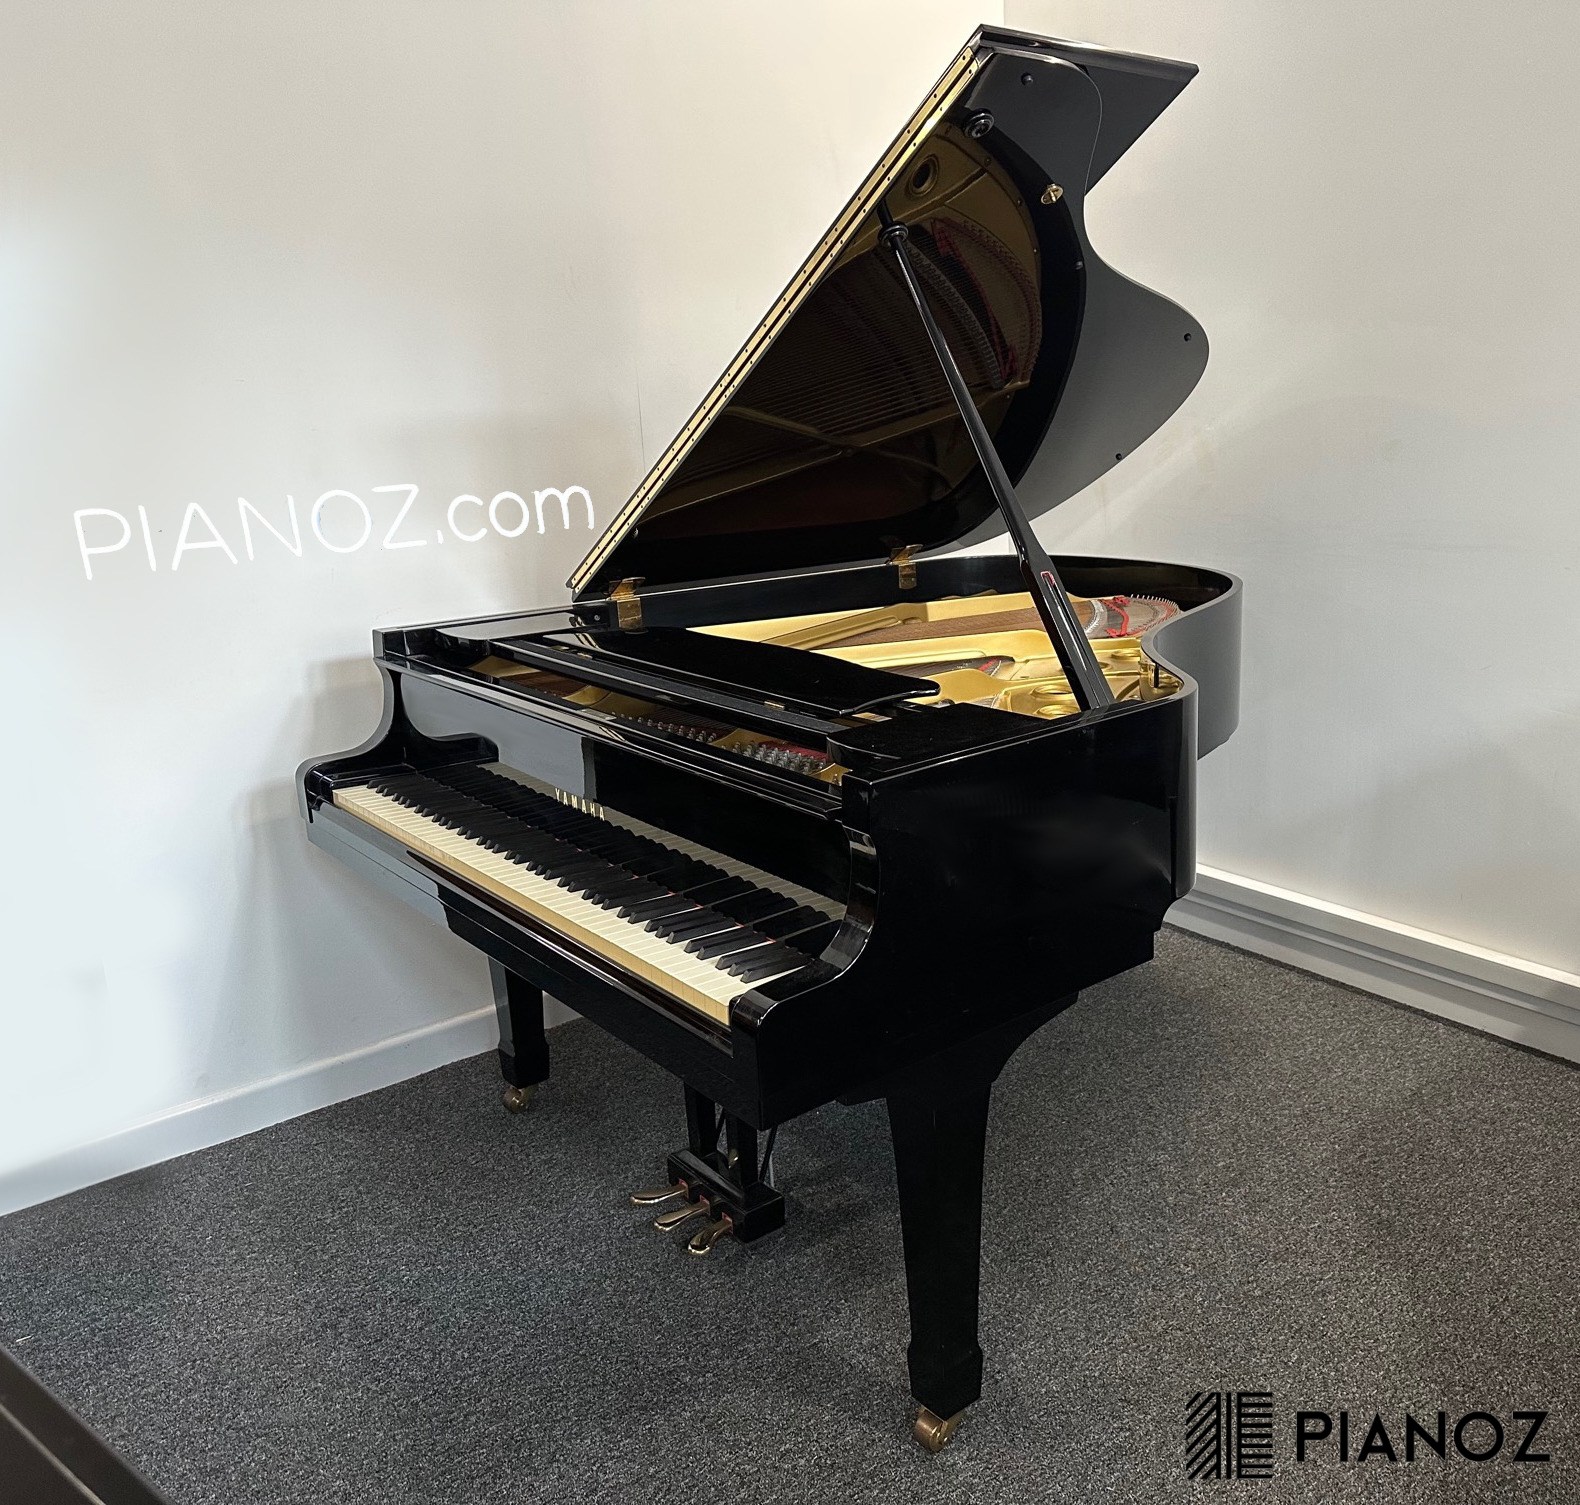 Yamaha C3 Japanese Grand Piano piano for sale in UK